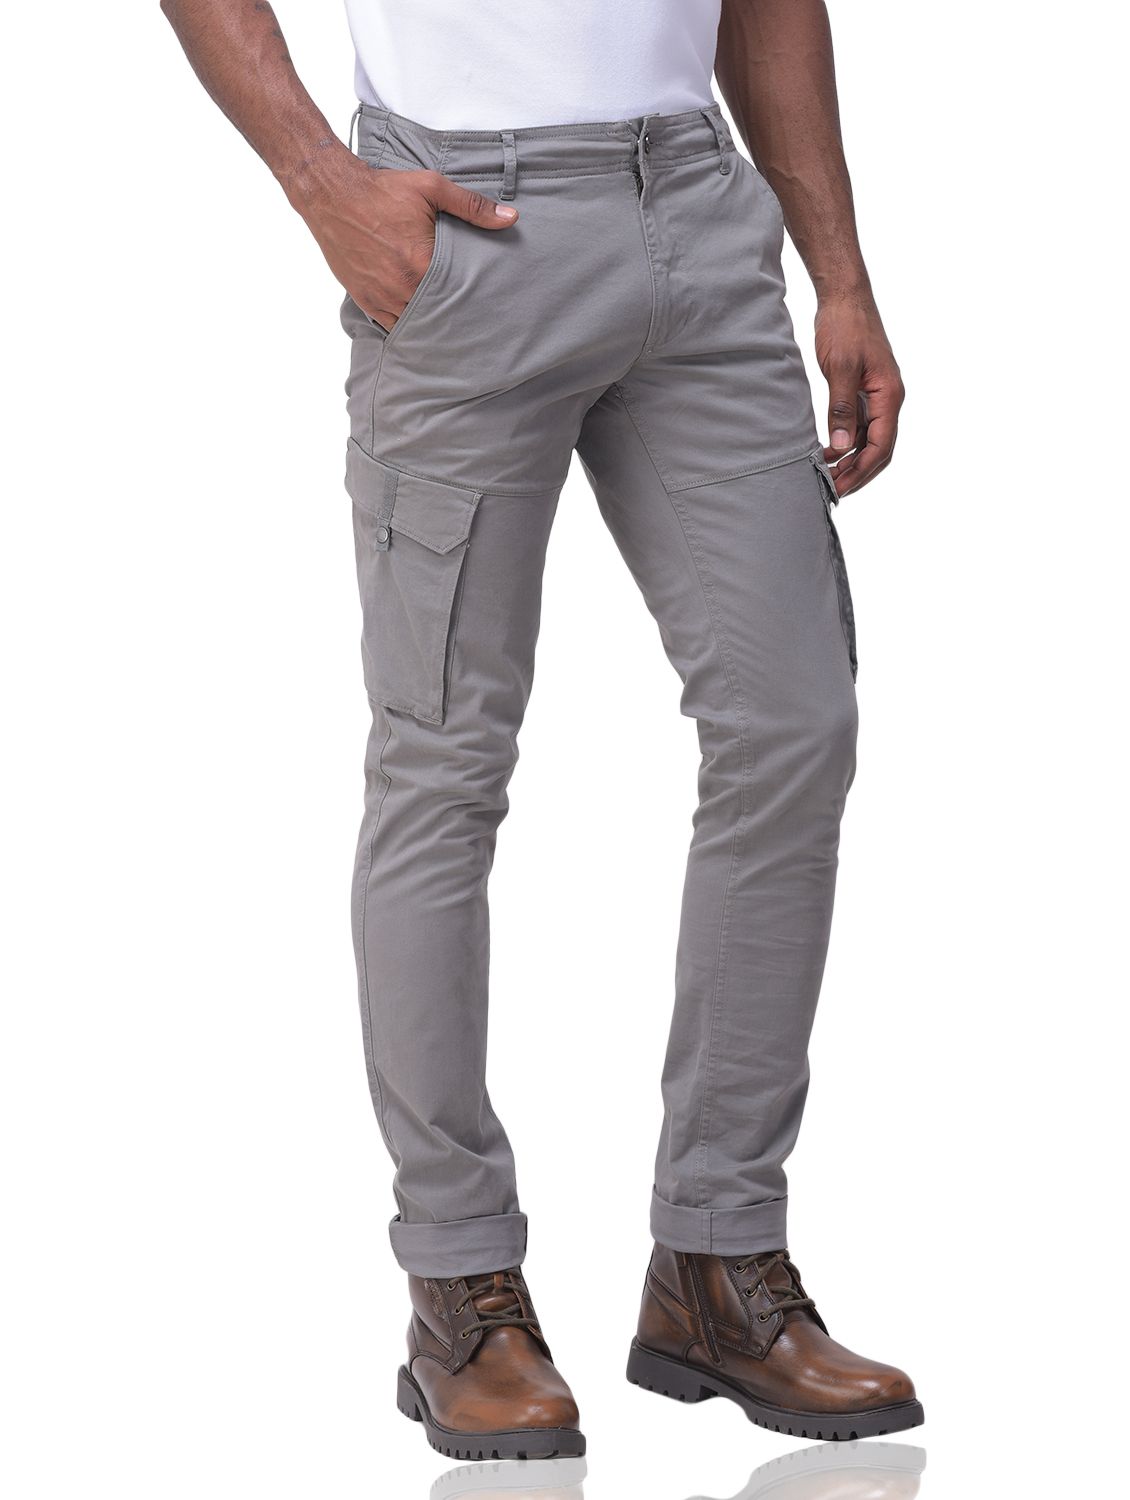 GREY cargo trousers for men